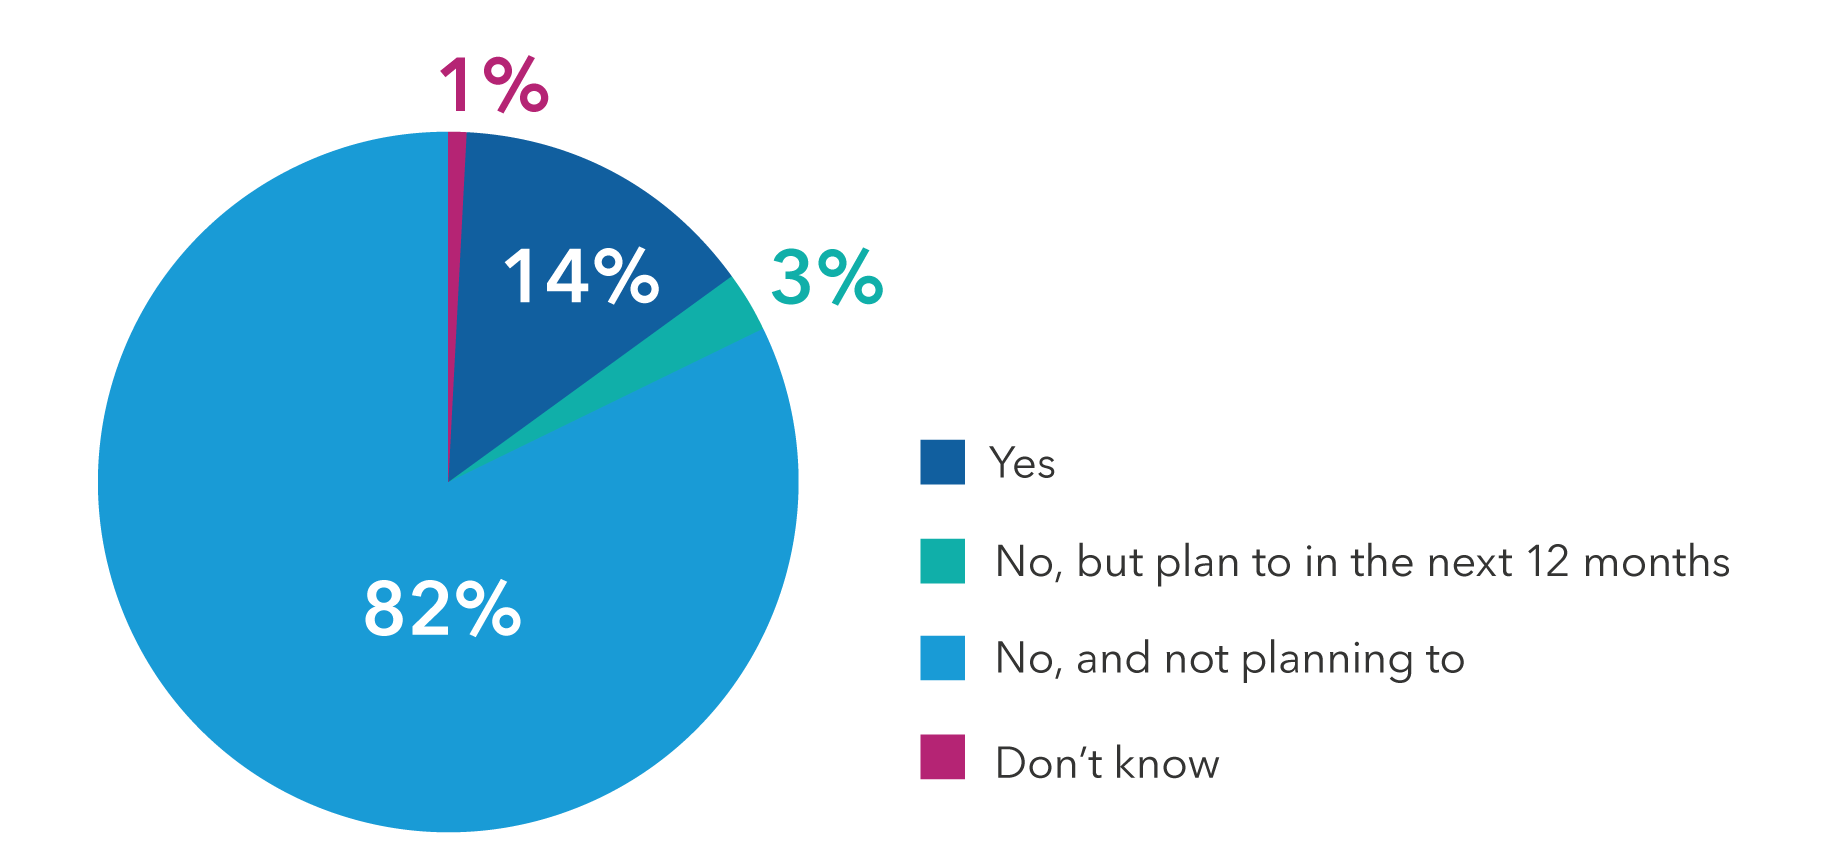 Pie chart shows that 82% of respondents answered “No, and not planning to,” 14% answered “Yes,” 3% answered “No, but plan to in the next 12 months,” and 1% answered, “Don’t know.”